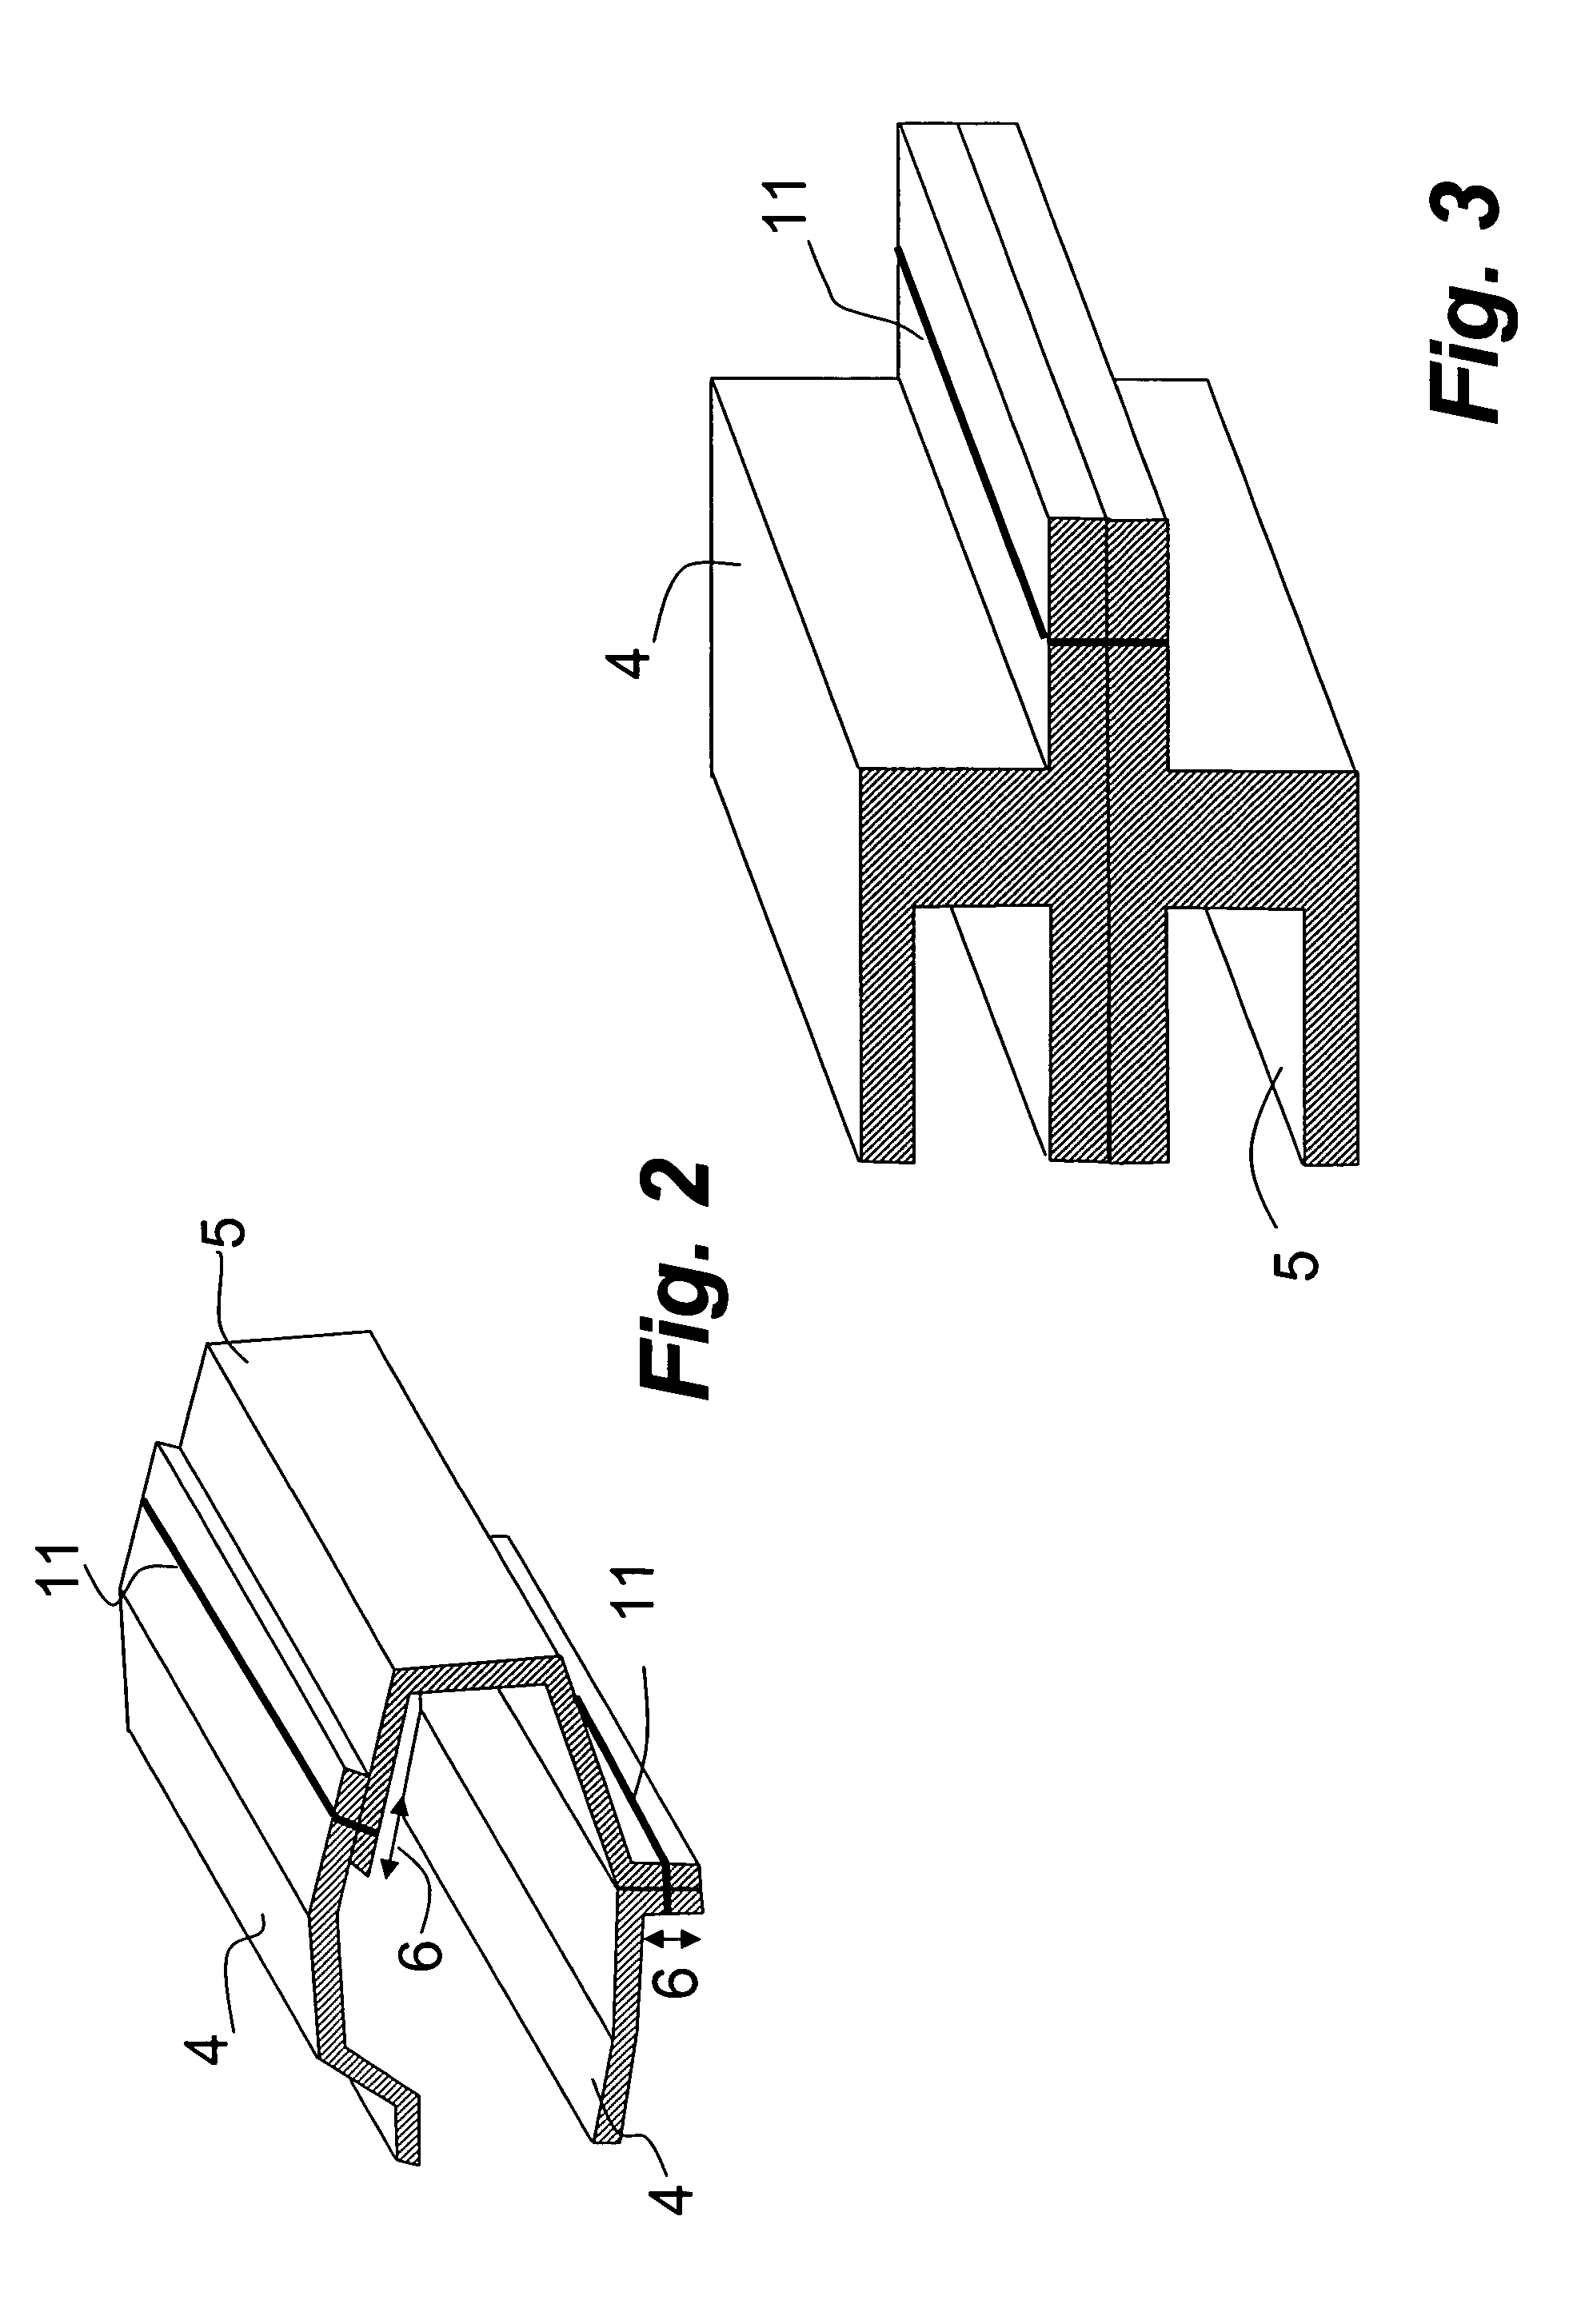 Manufacturing method for joining multiple parts